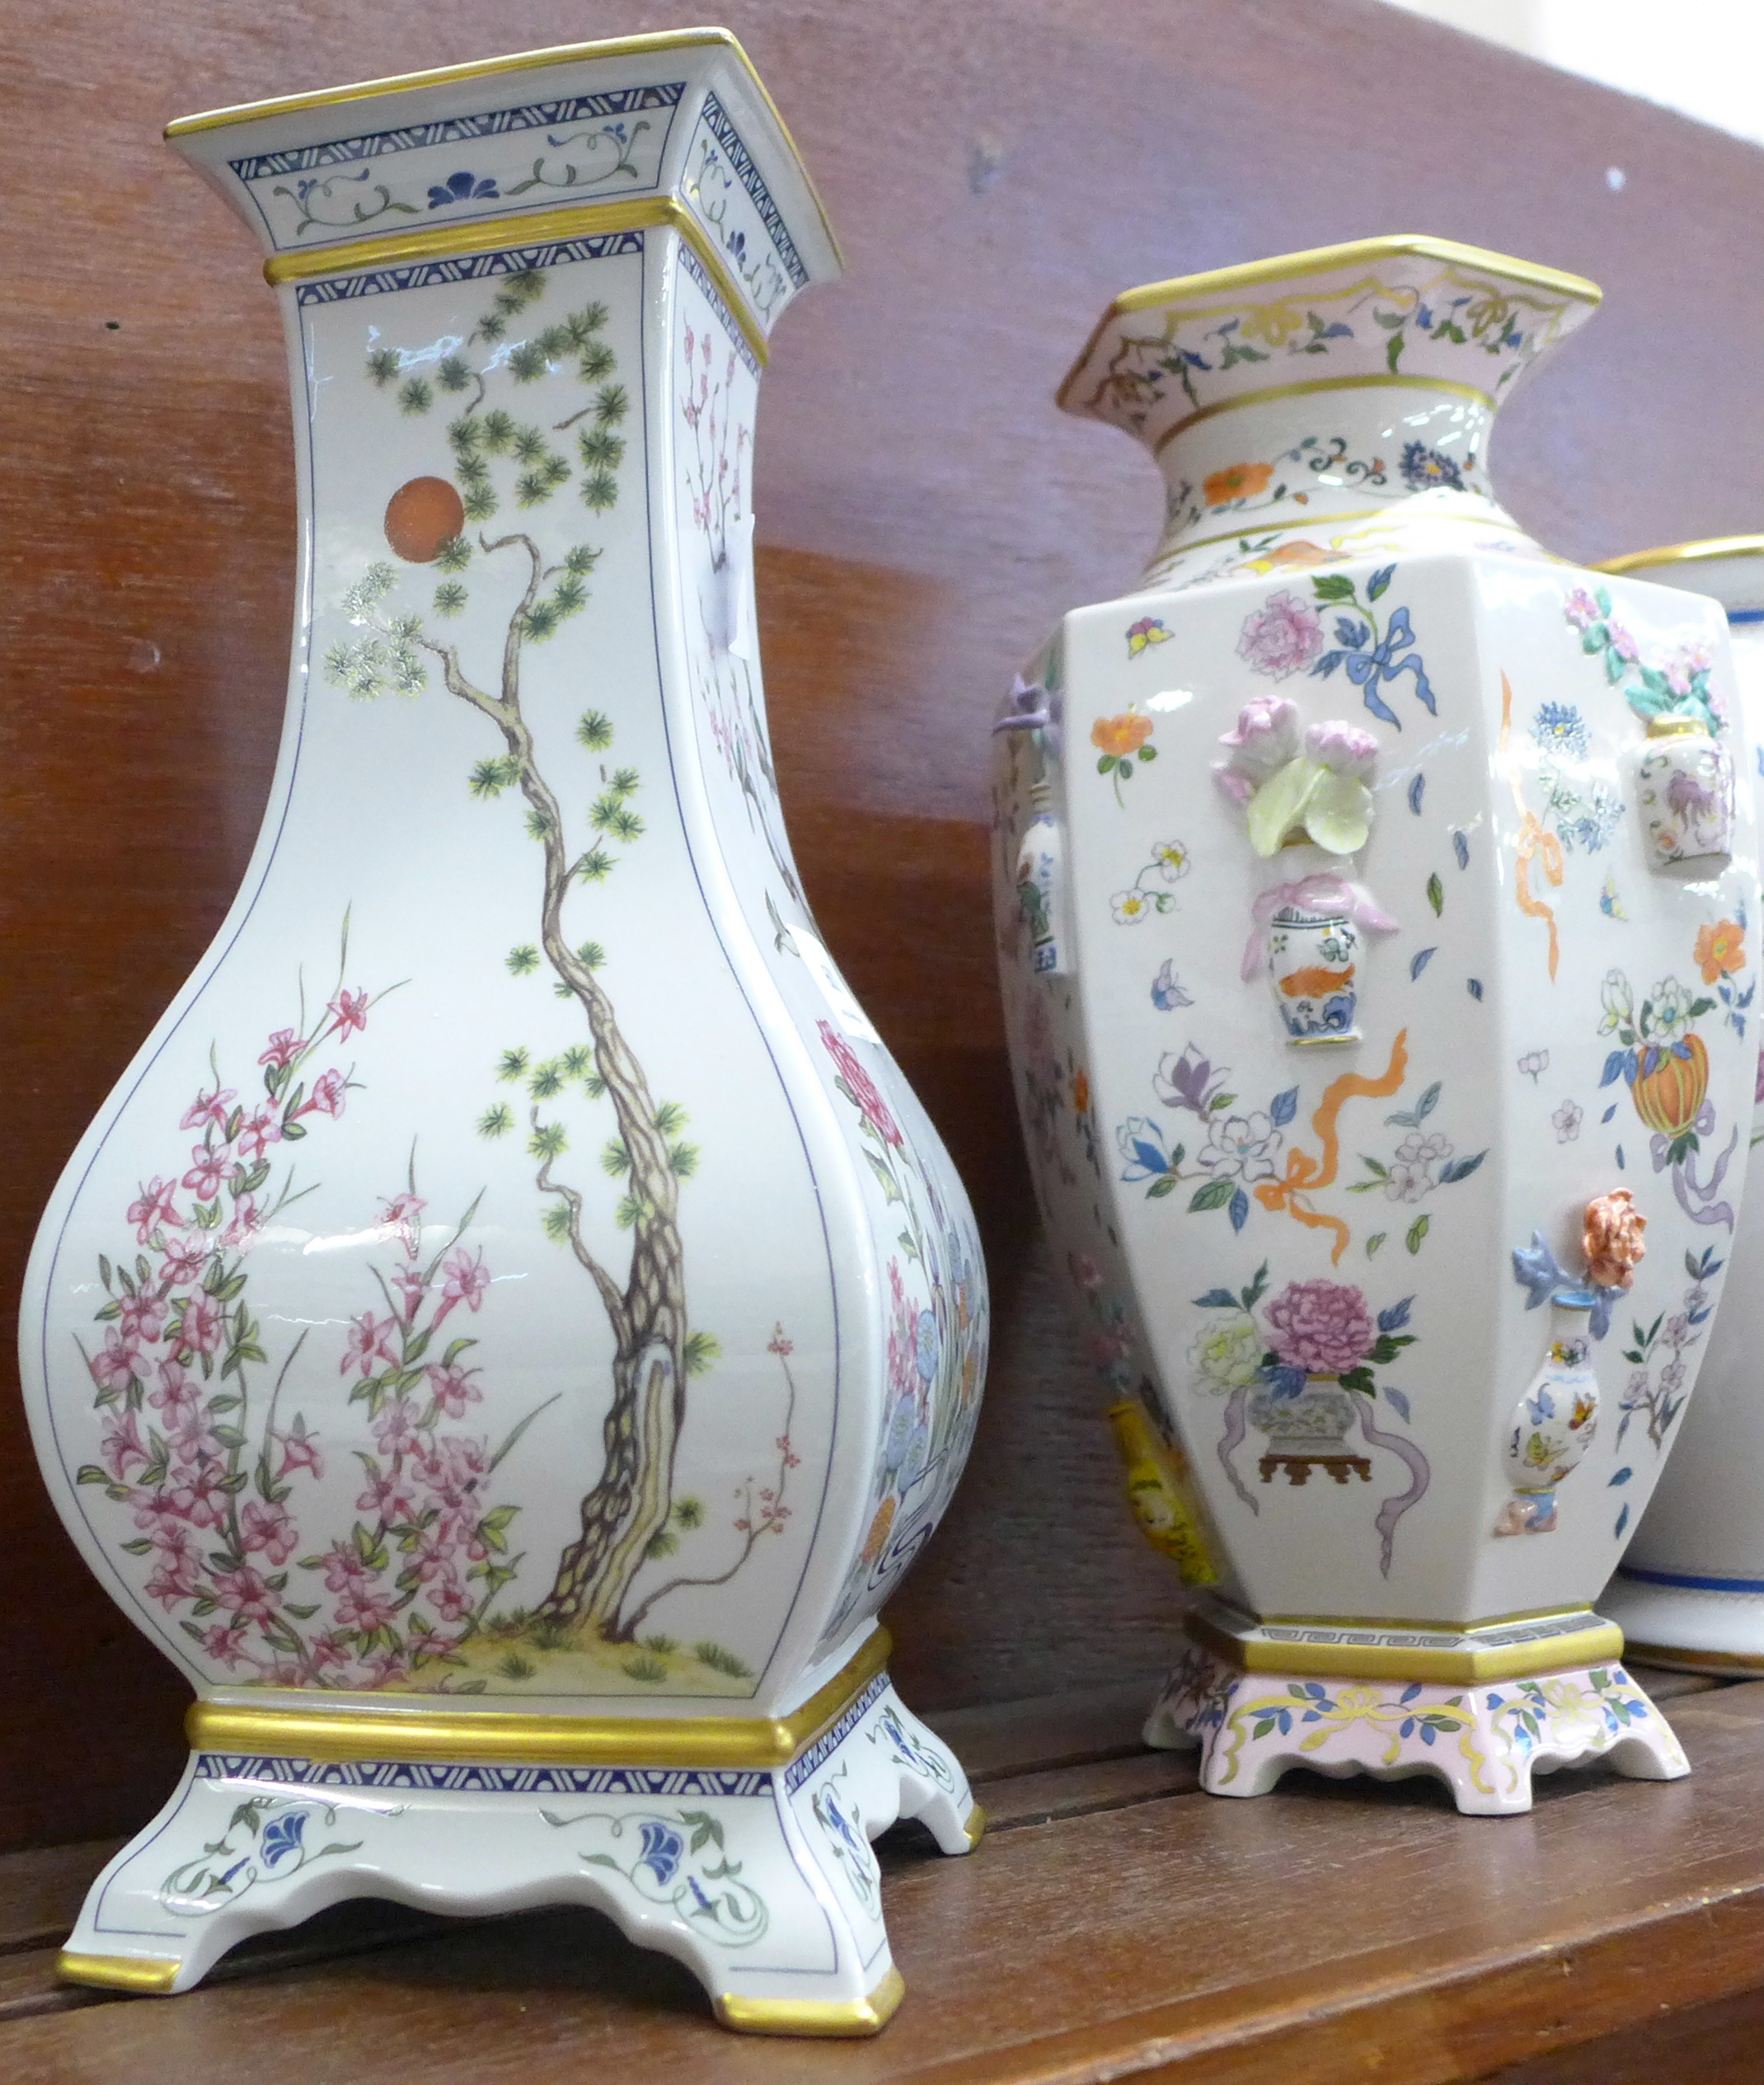 Four vases; Franklin Mint decorated in the Japanese style - a vase of One Hundred Flowers by - Image 2 of 5